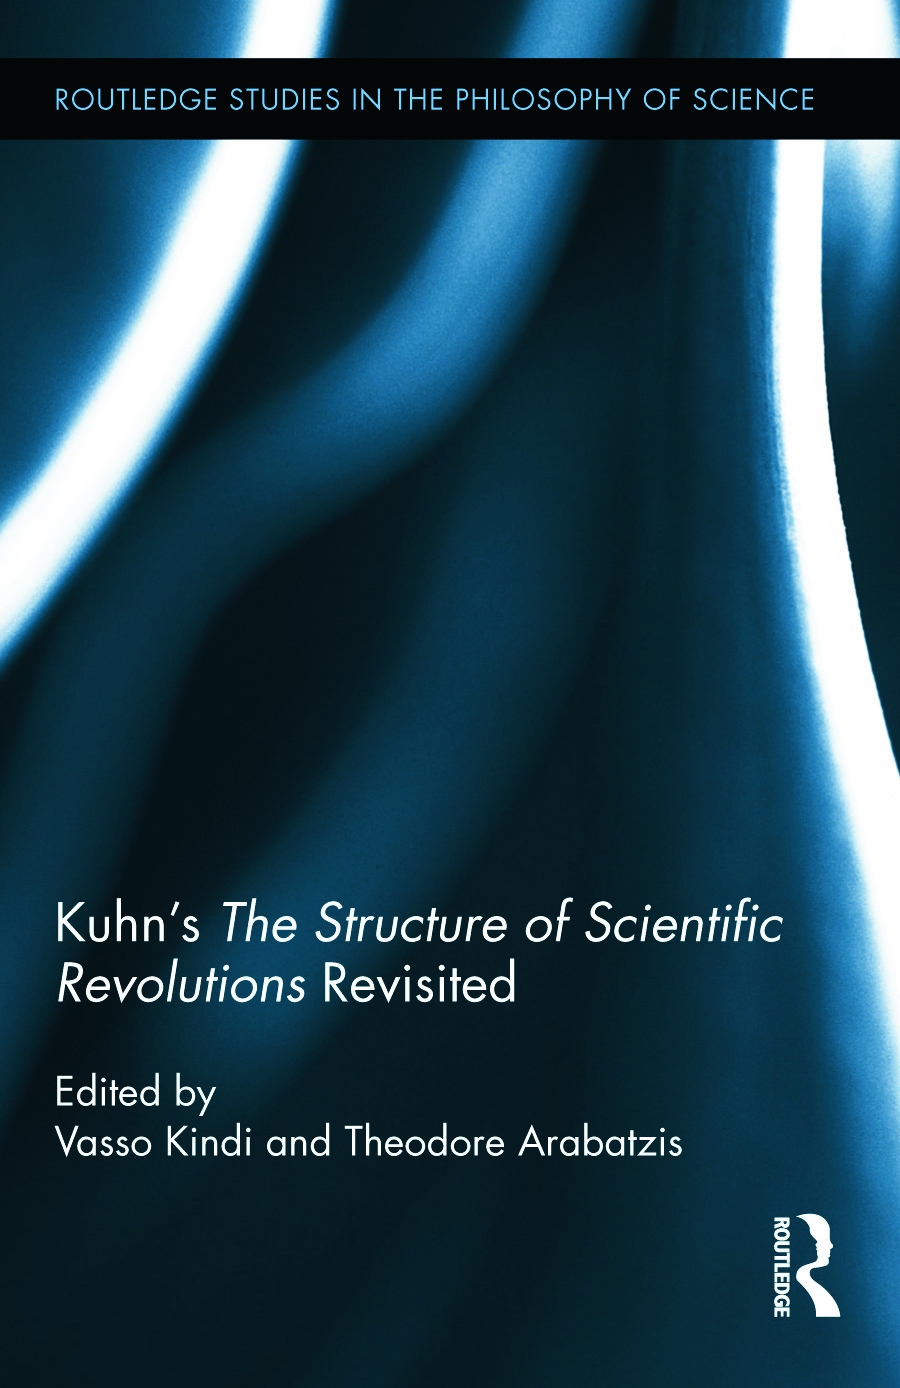 Kuhn’s the Structure of Scientific Revolutions Revisited